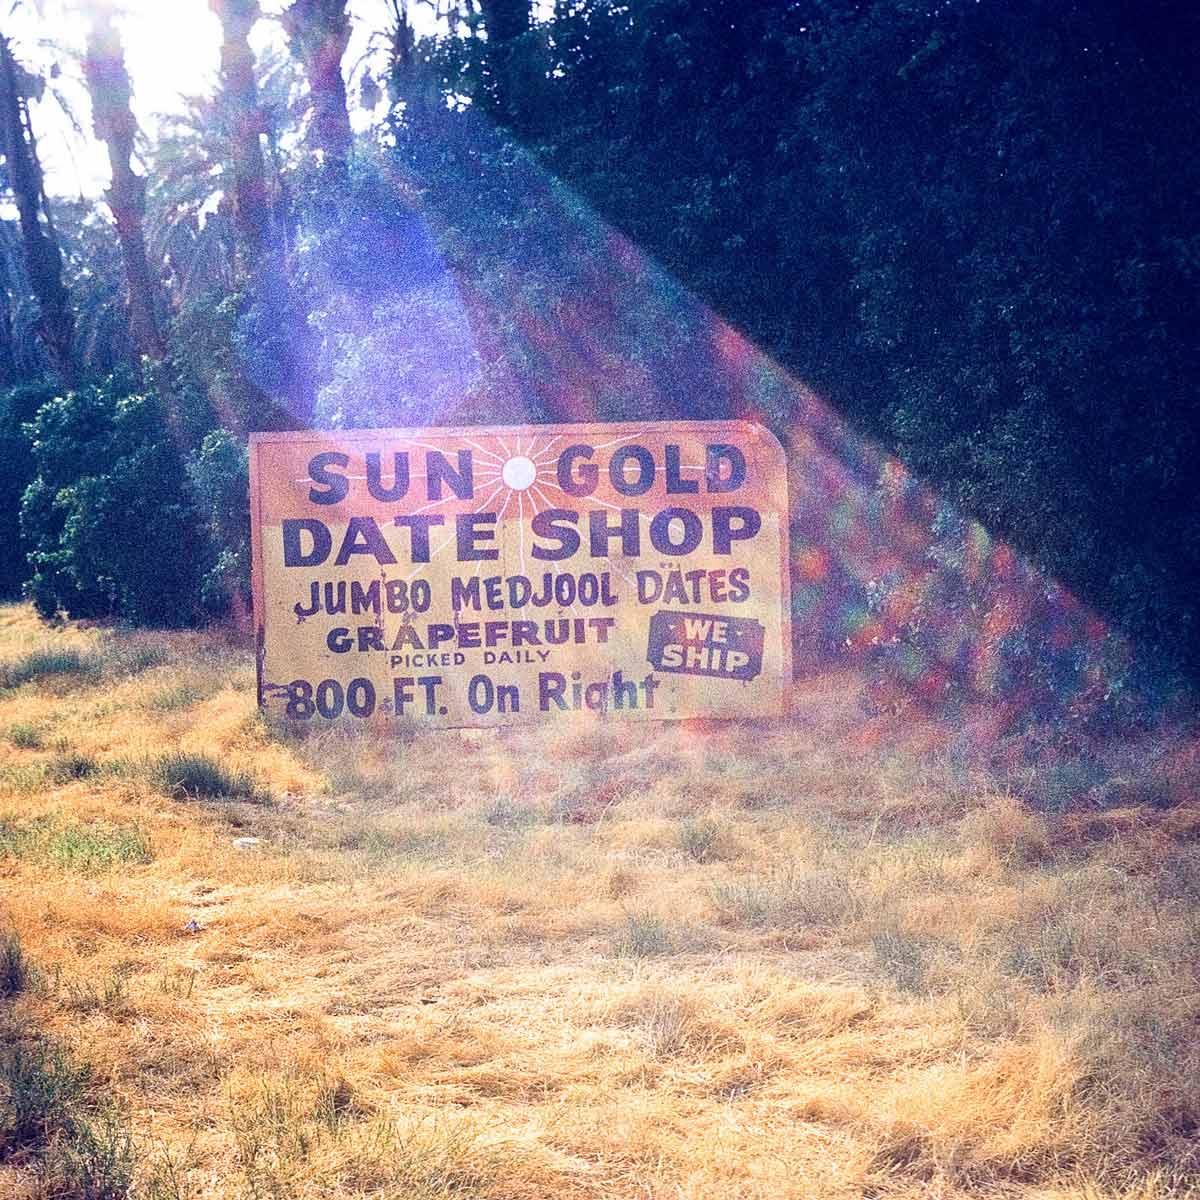 A sign in a sunny clearing that says "Sun Gold Date Shop" 